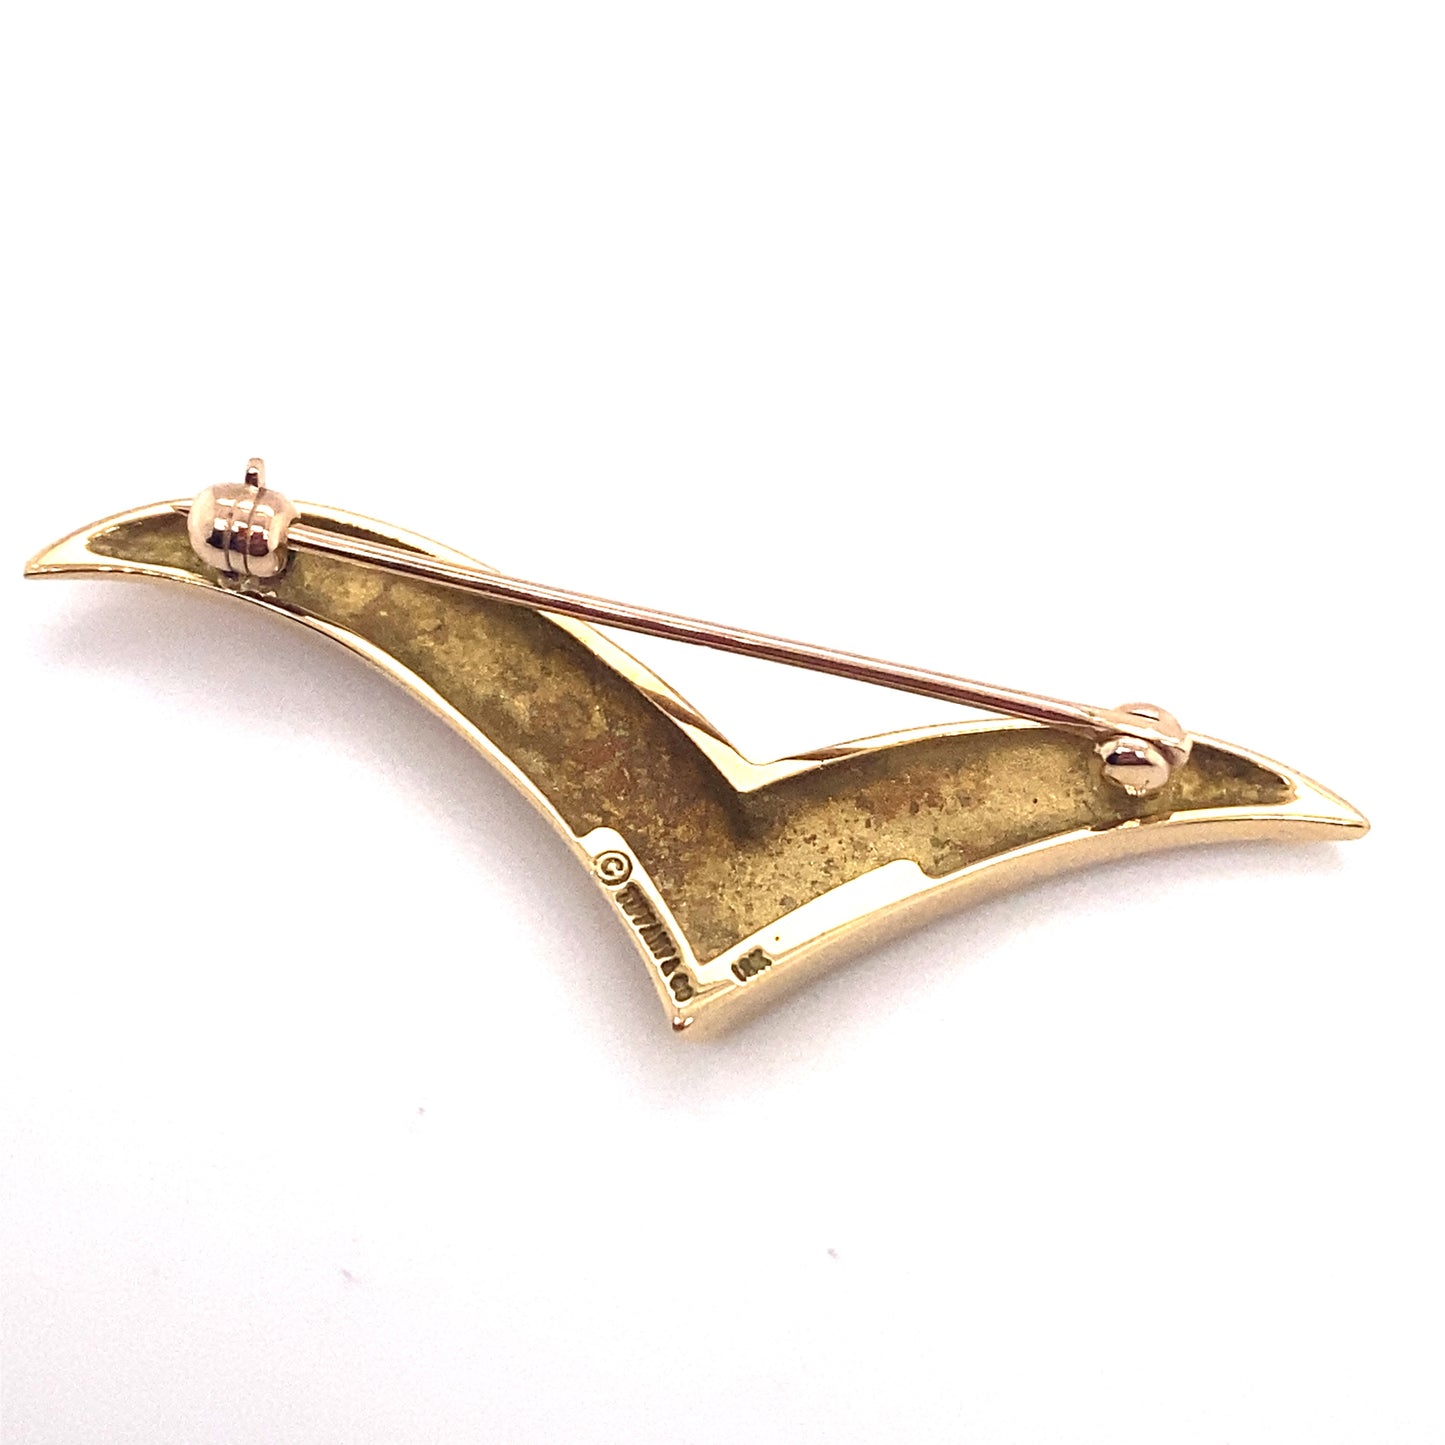 Tiffany & Co. Paloma Picasso Seagull Brooch in 18K Gold